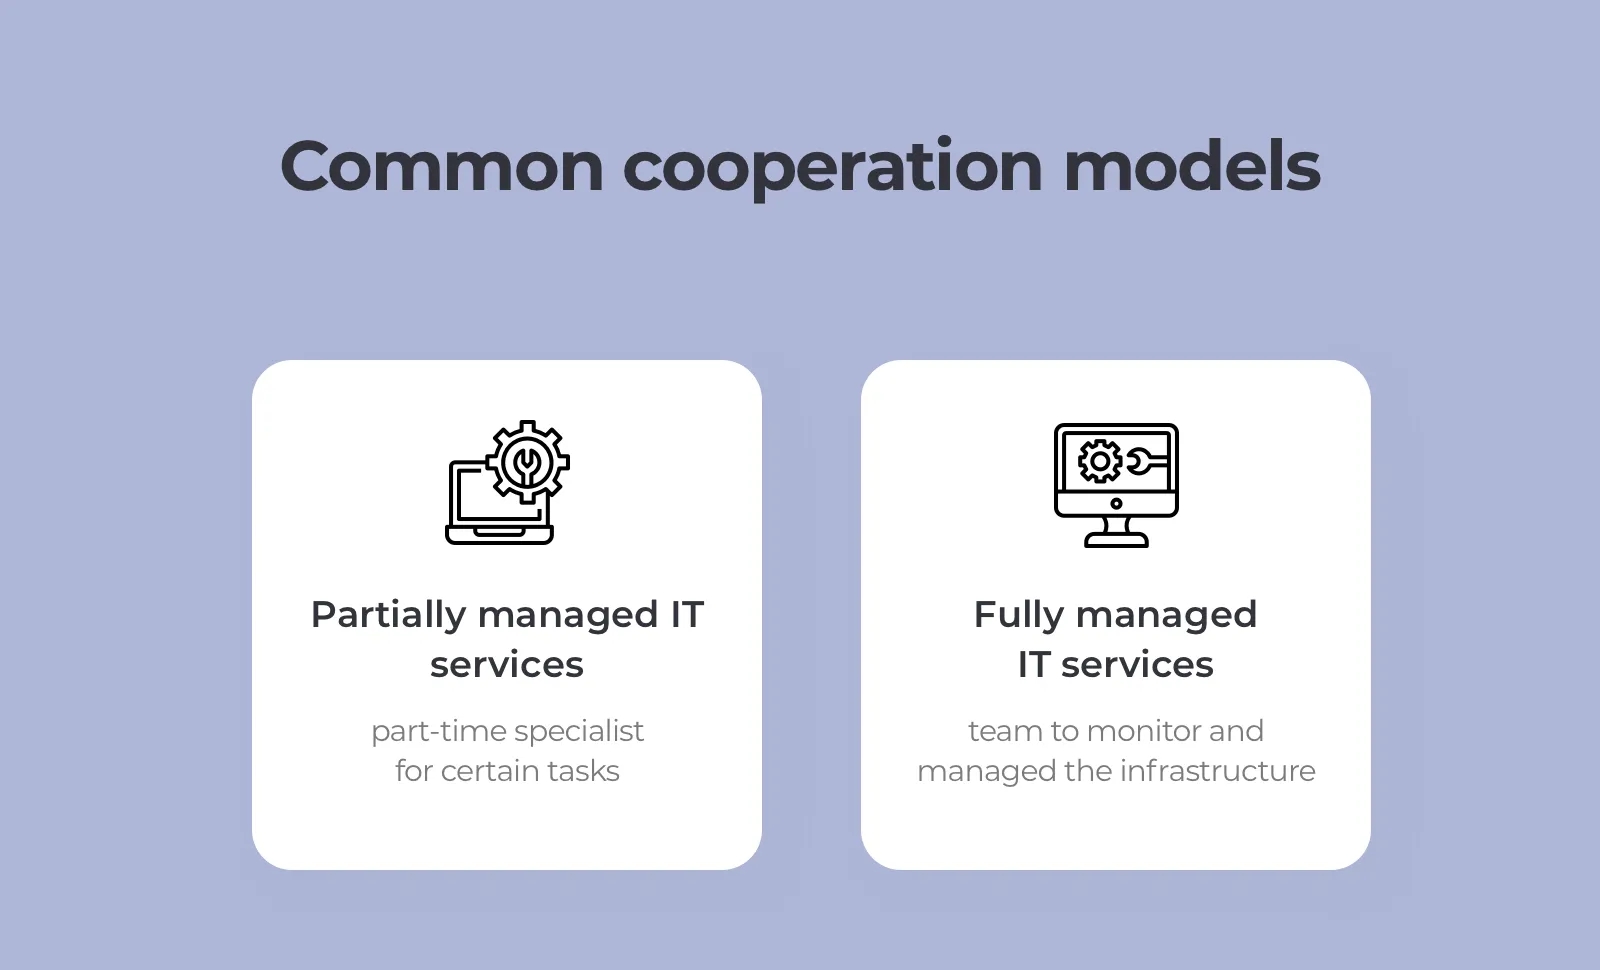 Cooperation models for managed IT services